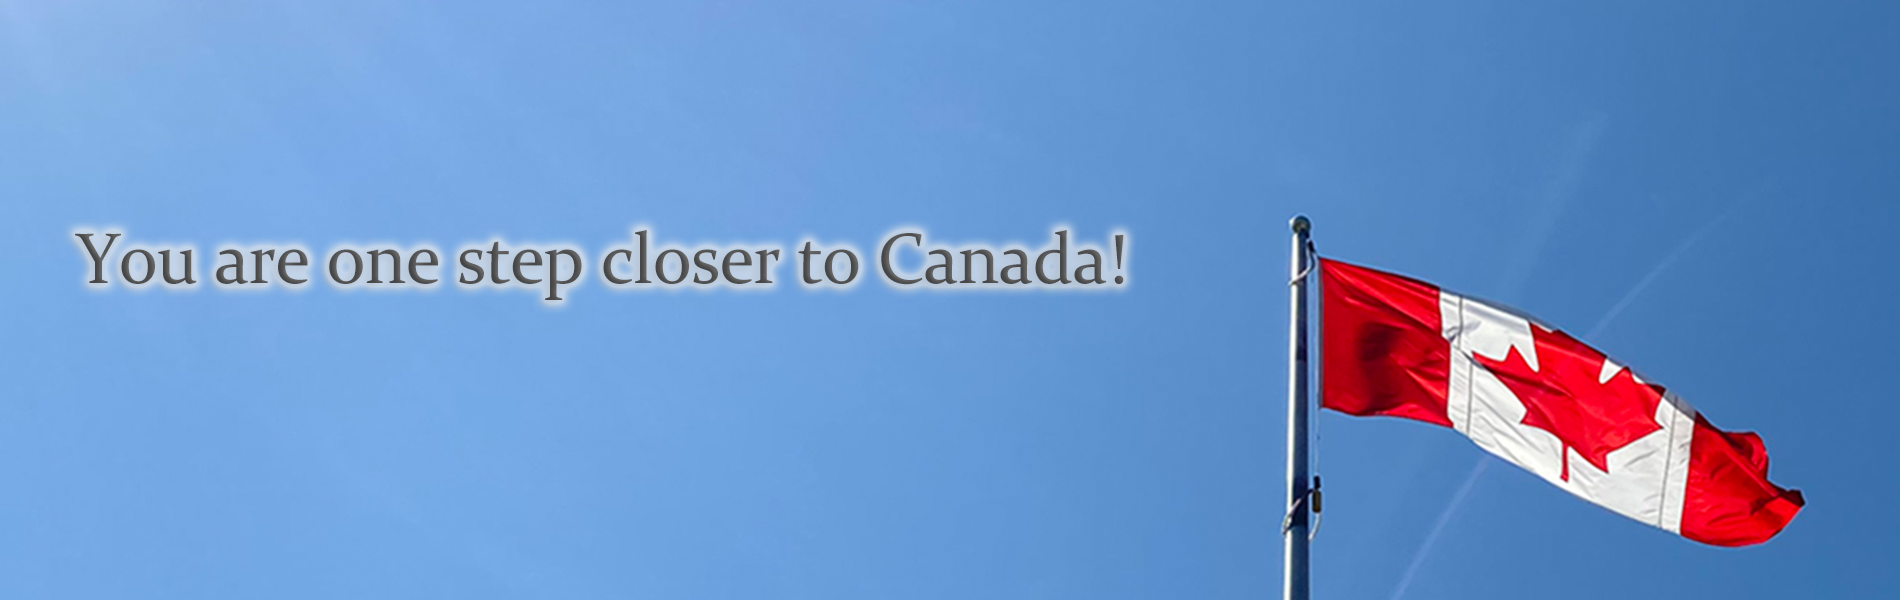 You are one step closer to Canada!